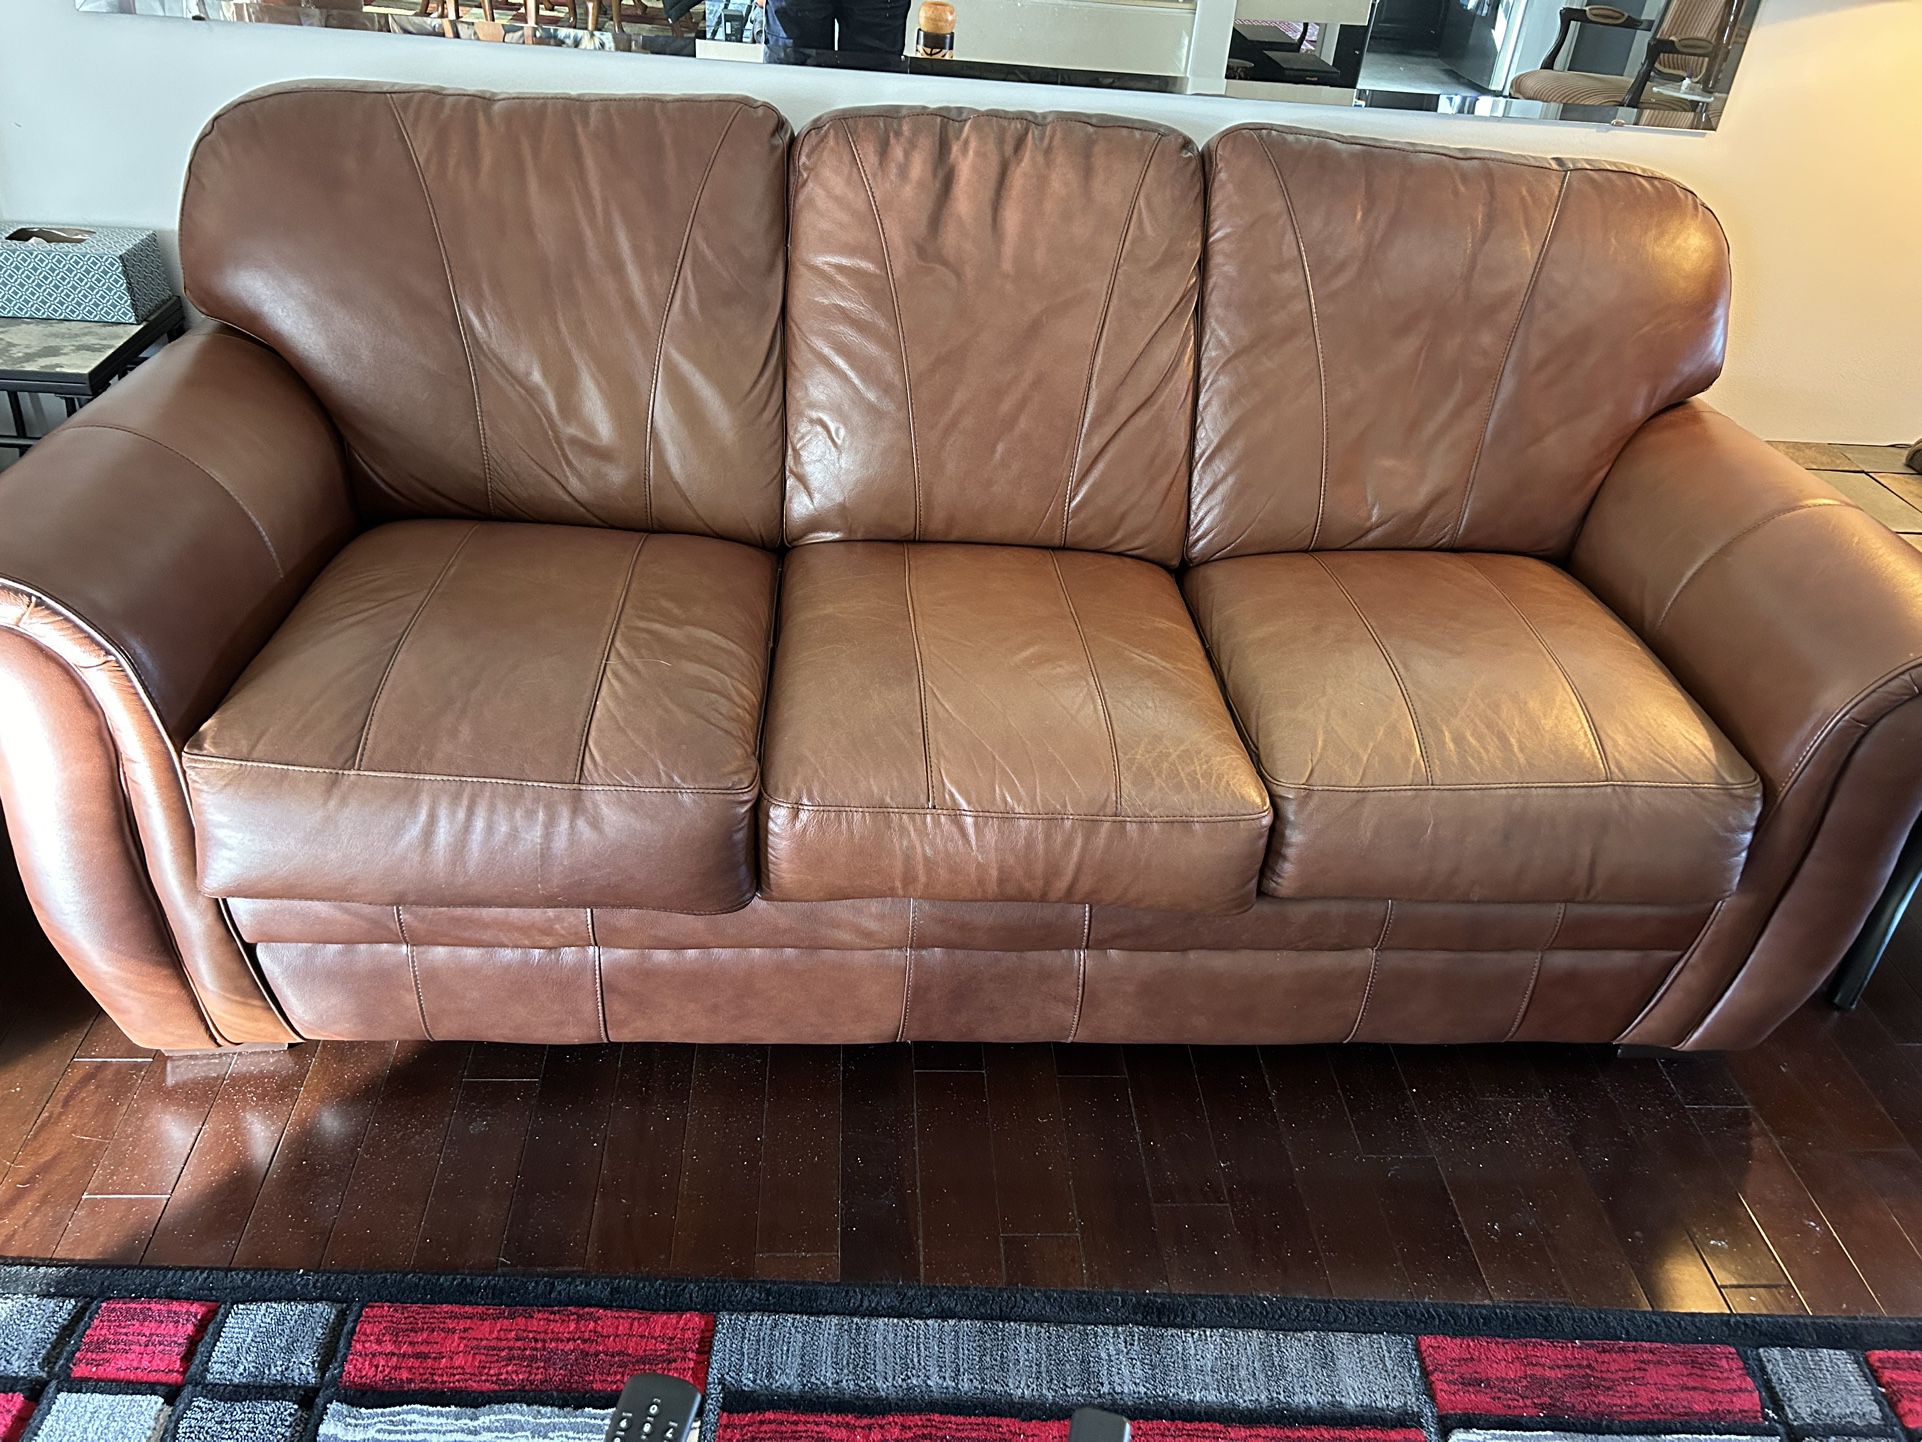 Leather Sofa W/ Matching Leather recliner 